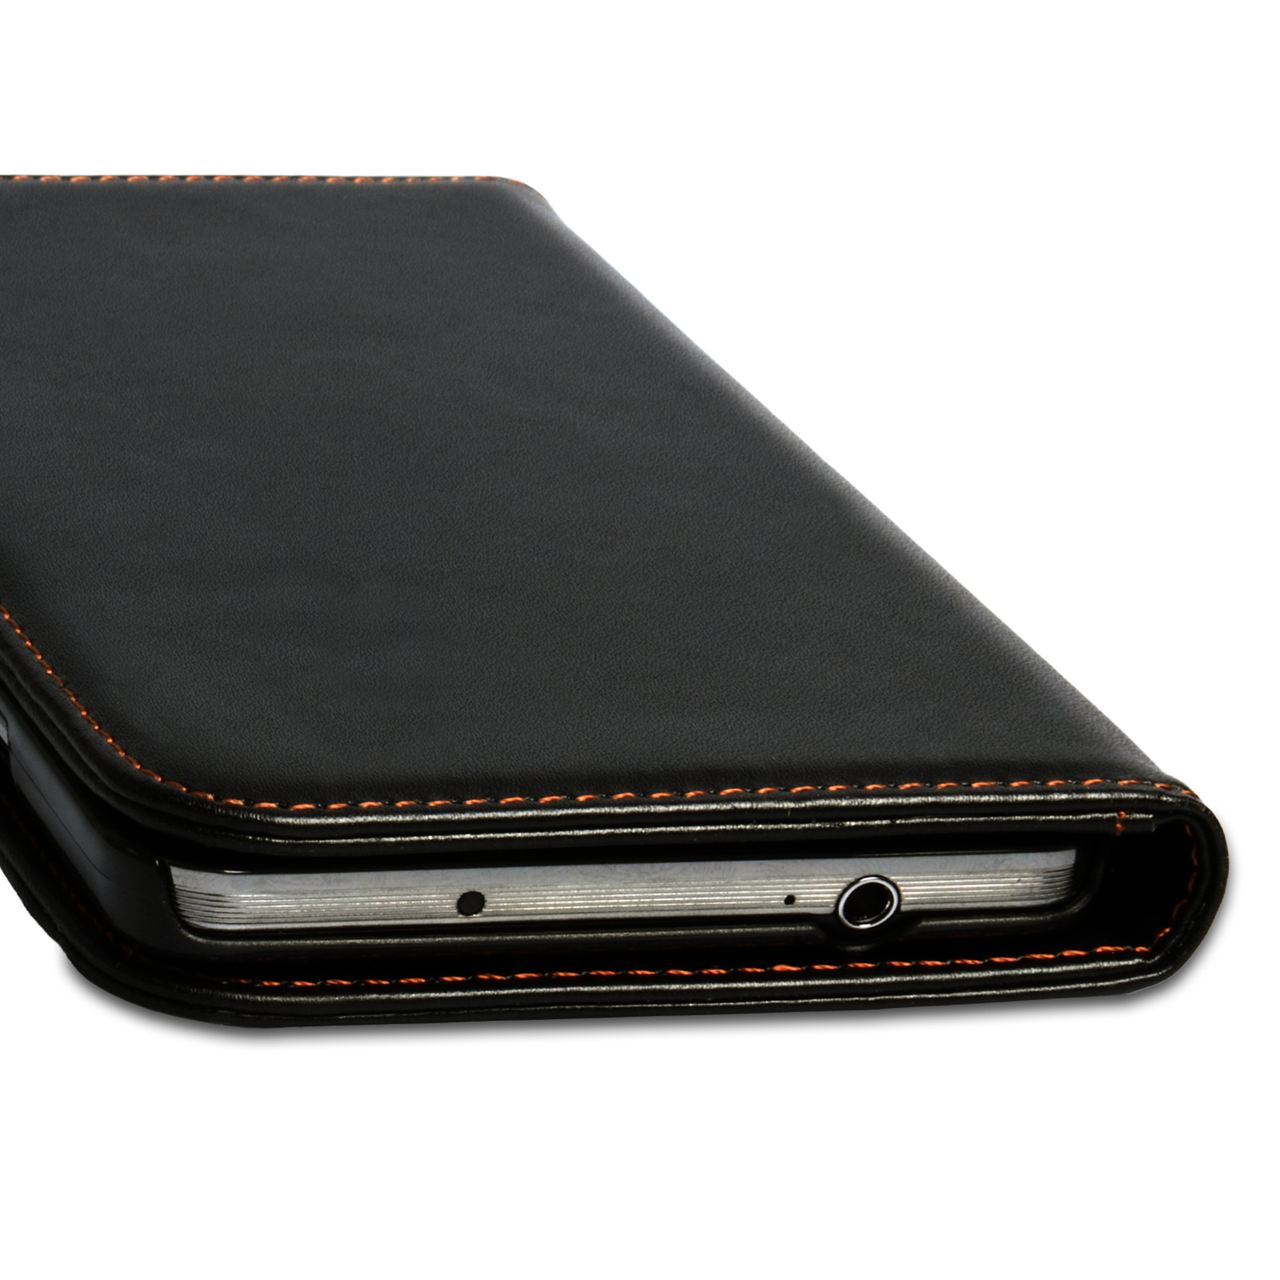 YouSave Samsung Galaxy Note 3 Leather Effect Wallet Case - Black